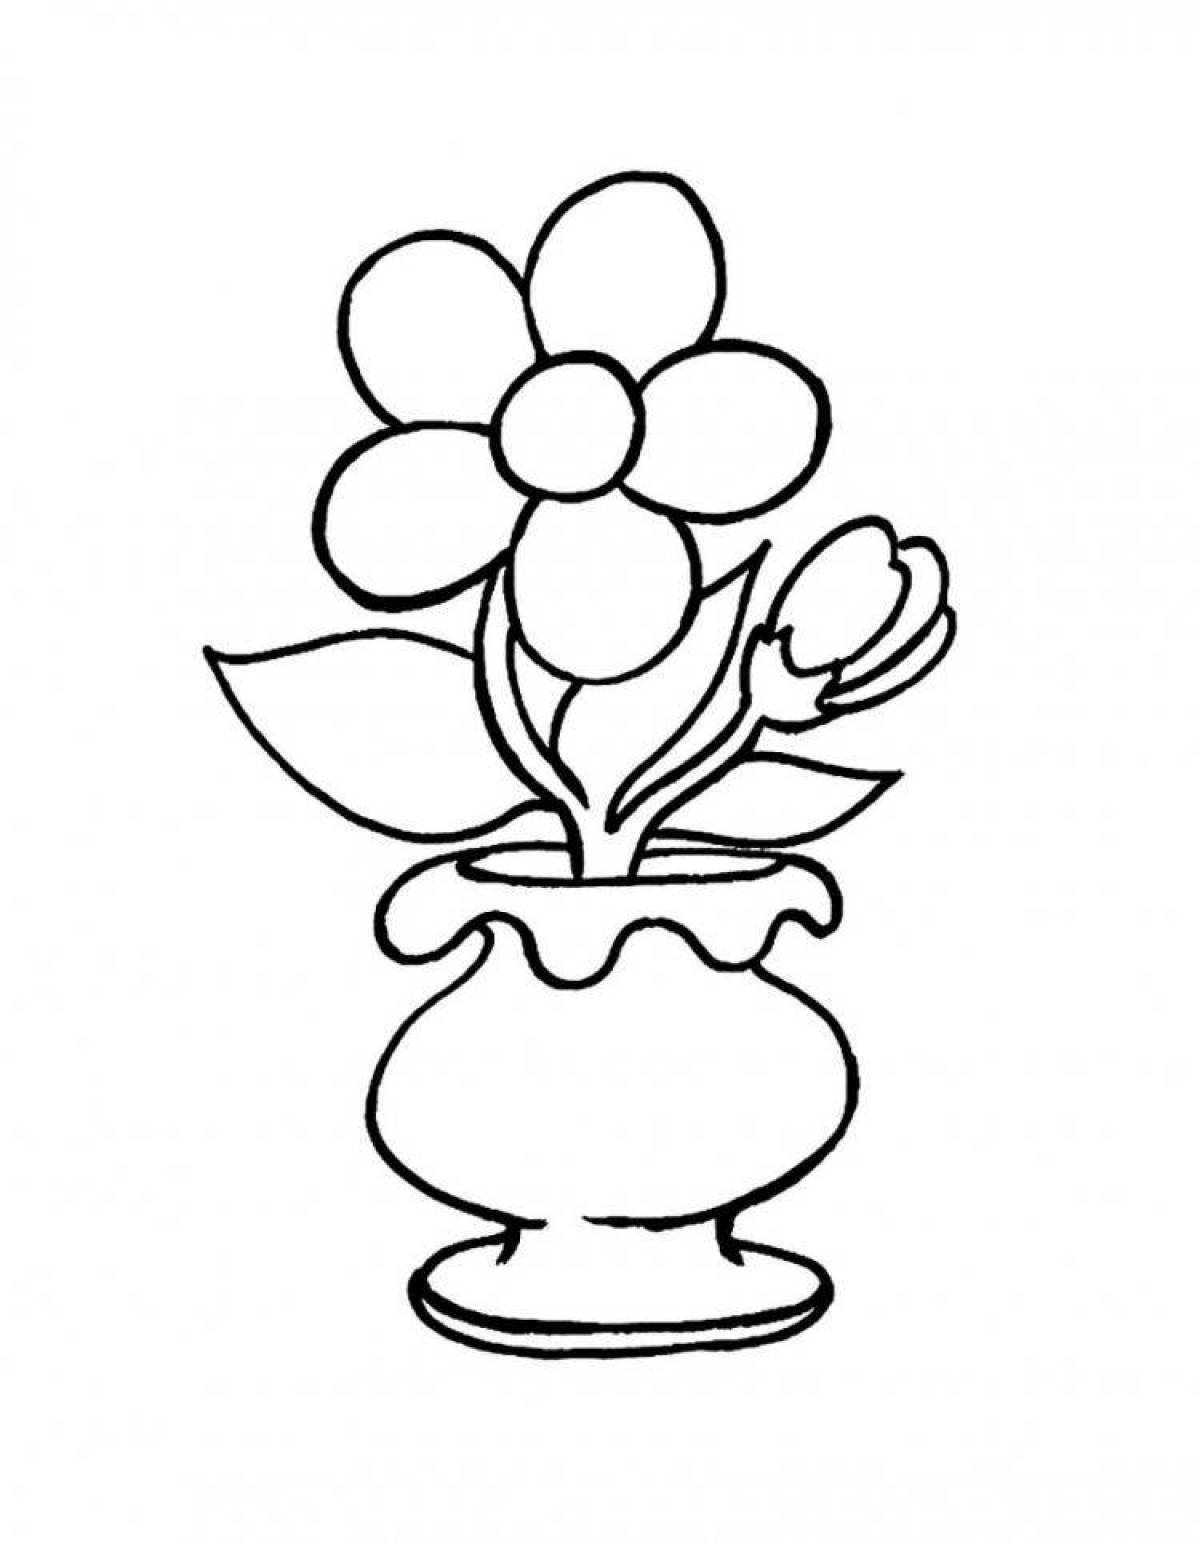 Coloring book bright vase with flowers